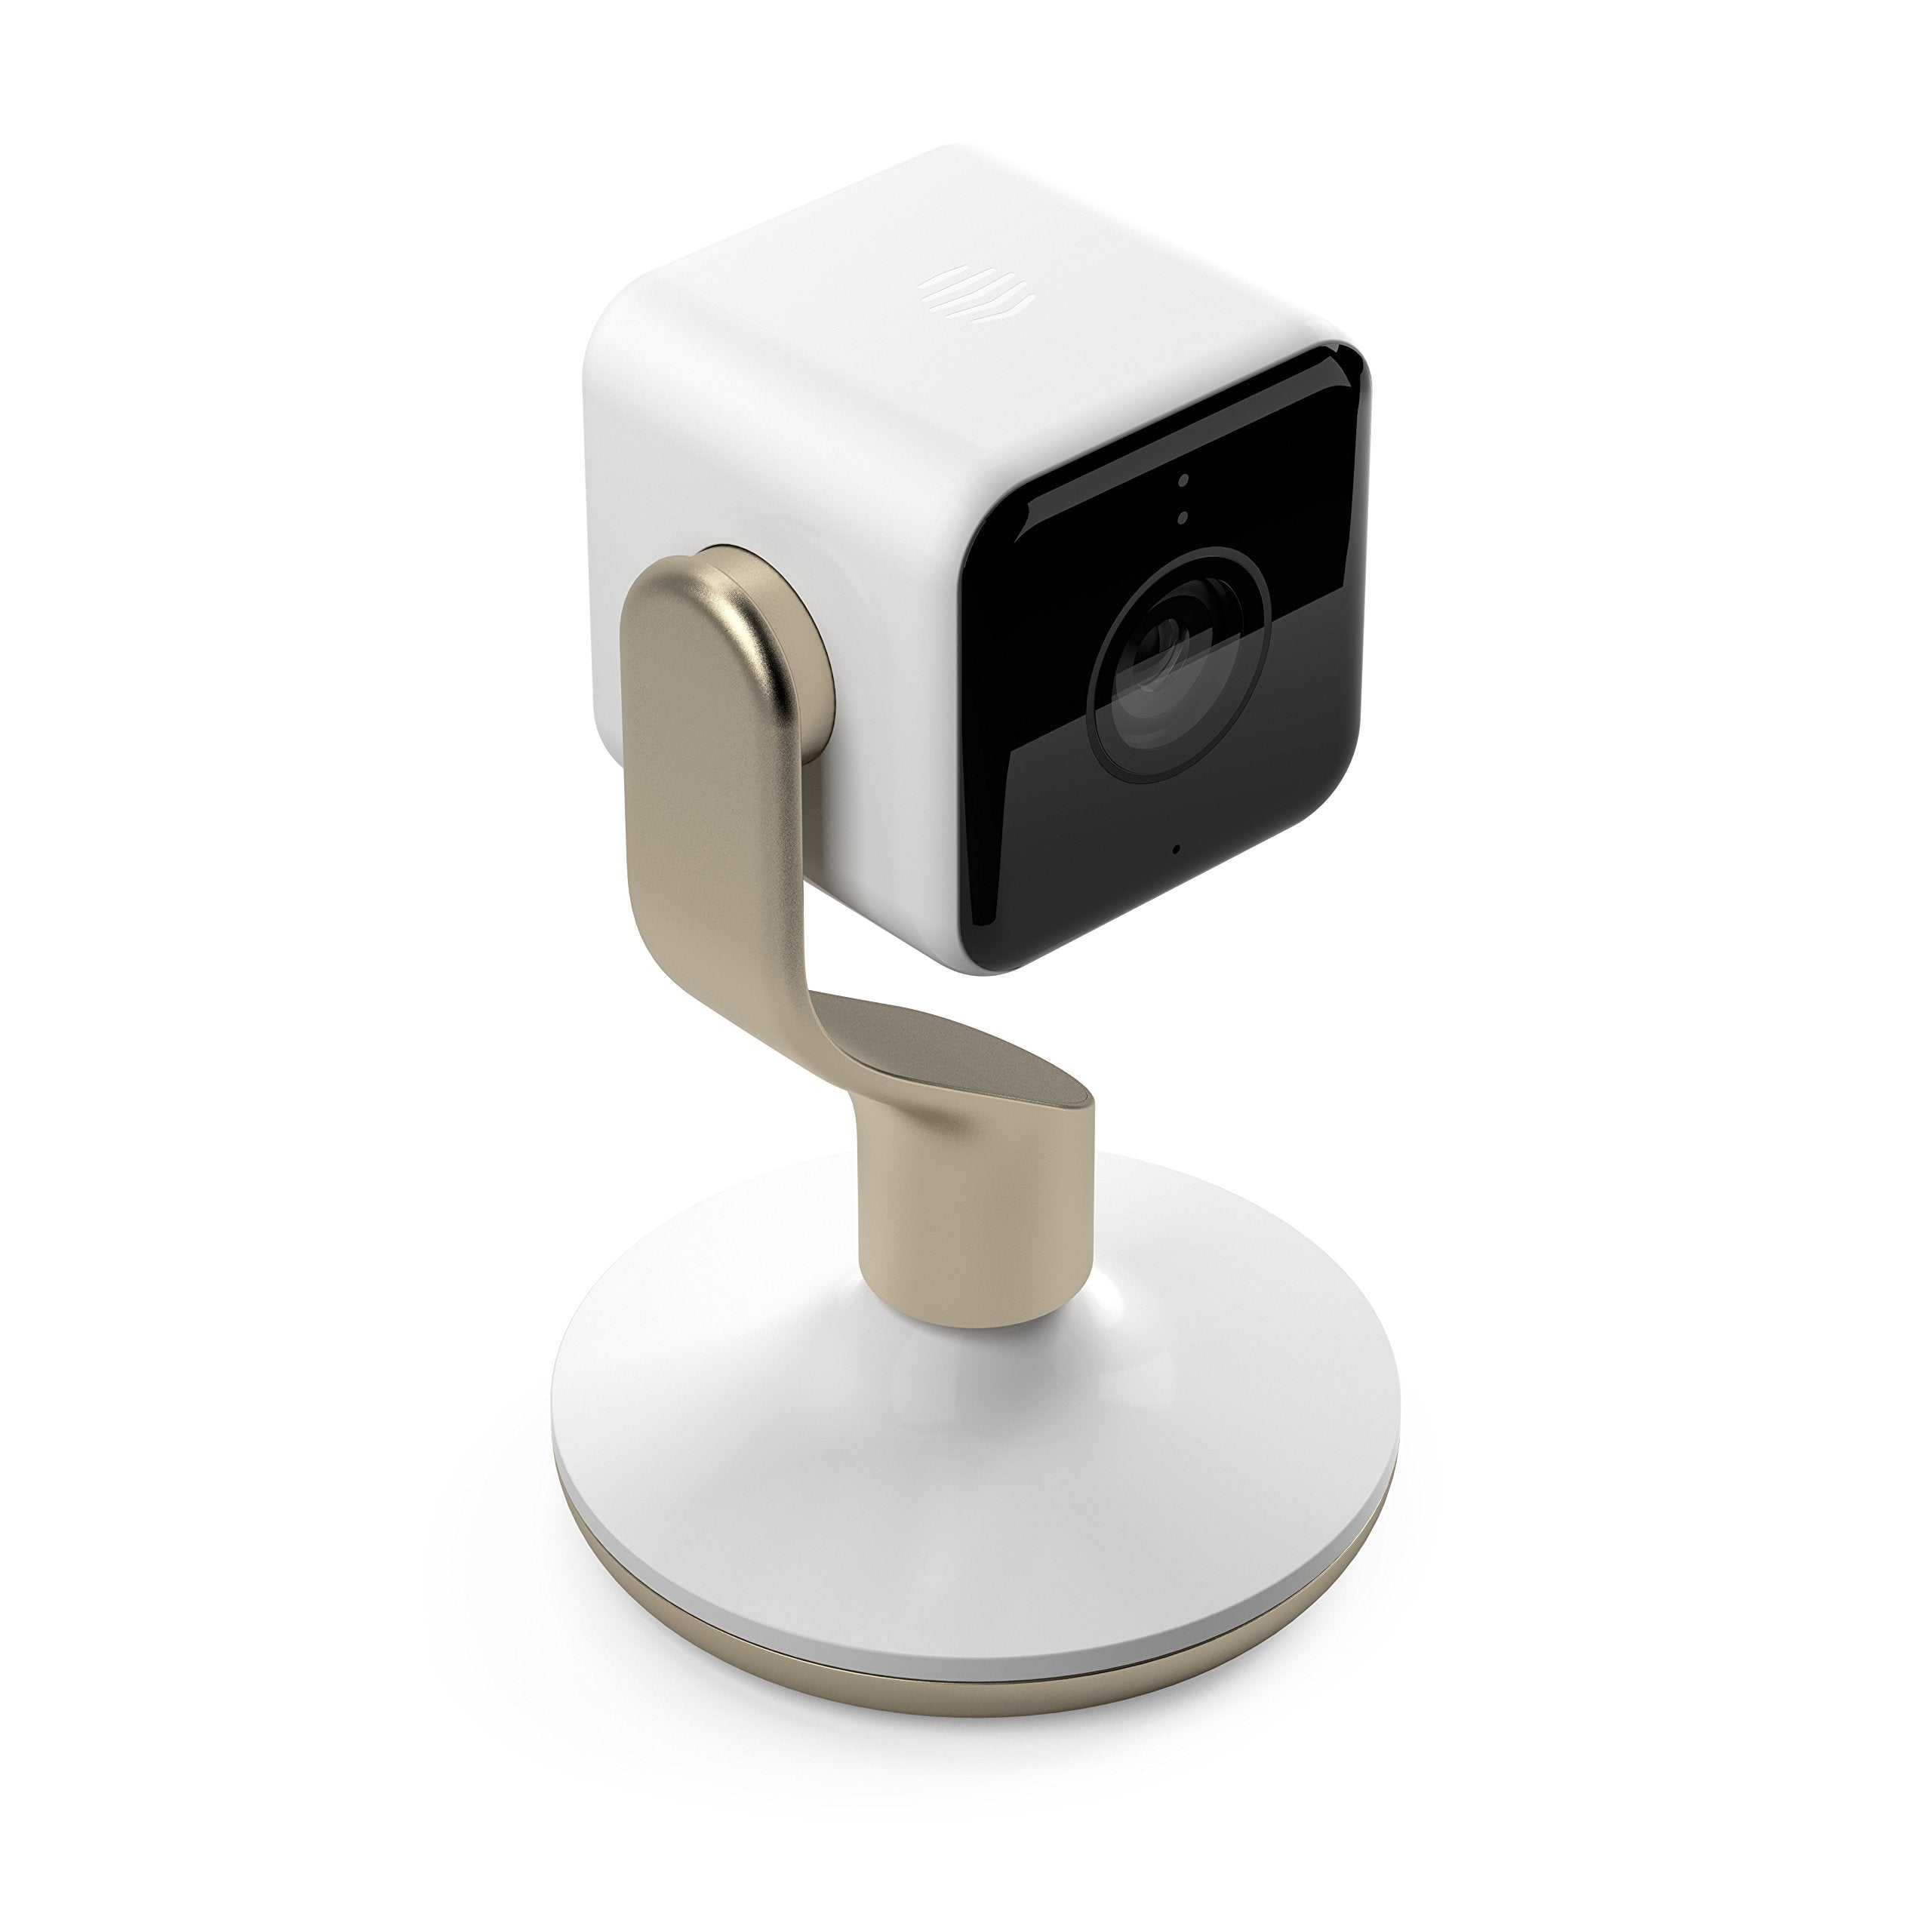 Hive UK7001720 View Indoor Security Camera - White & Champagne Gold, 14.5 cm*8.8 cm*8.8 cm